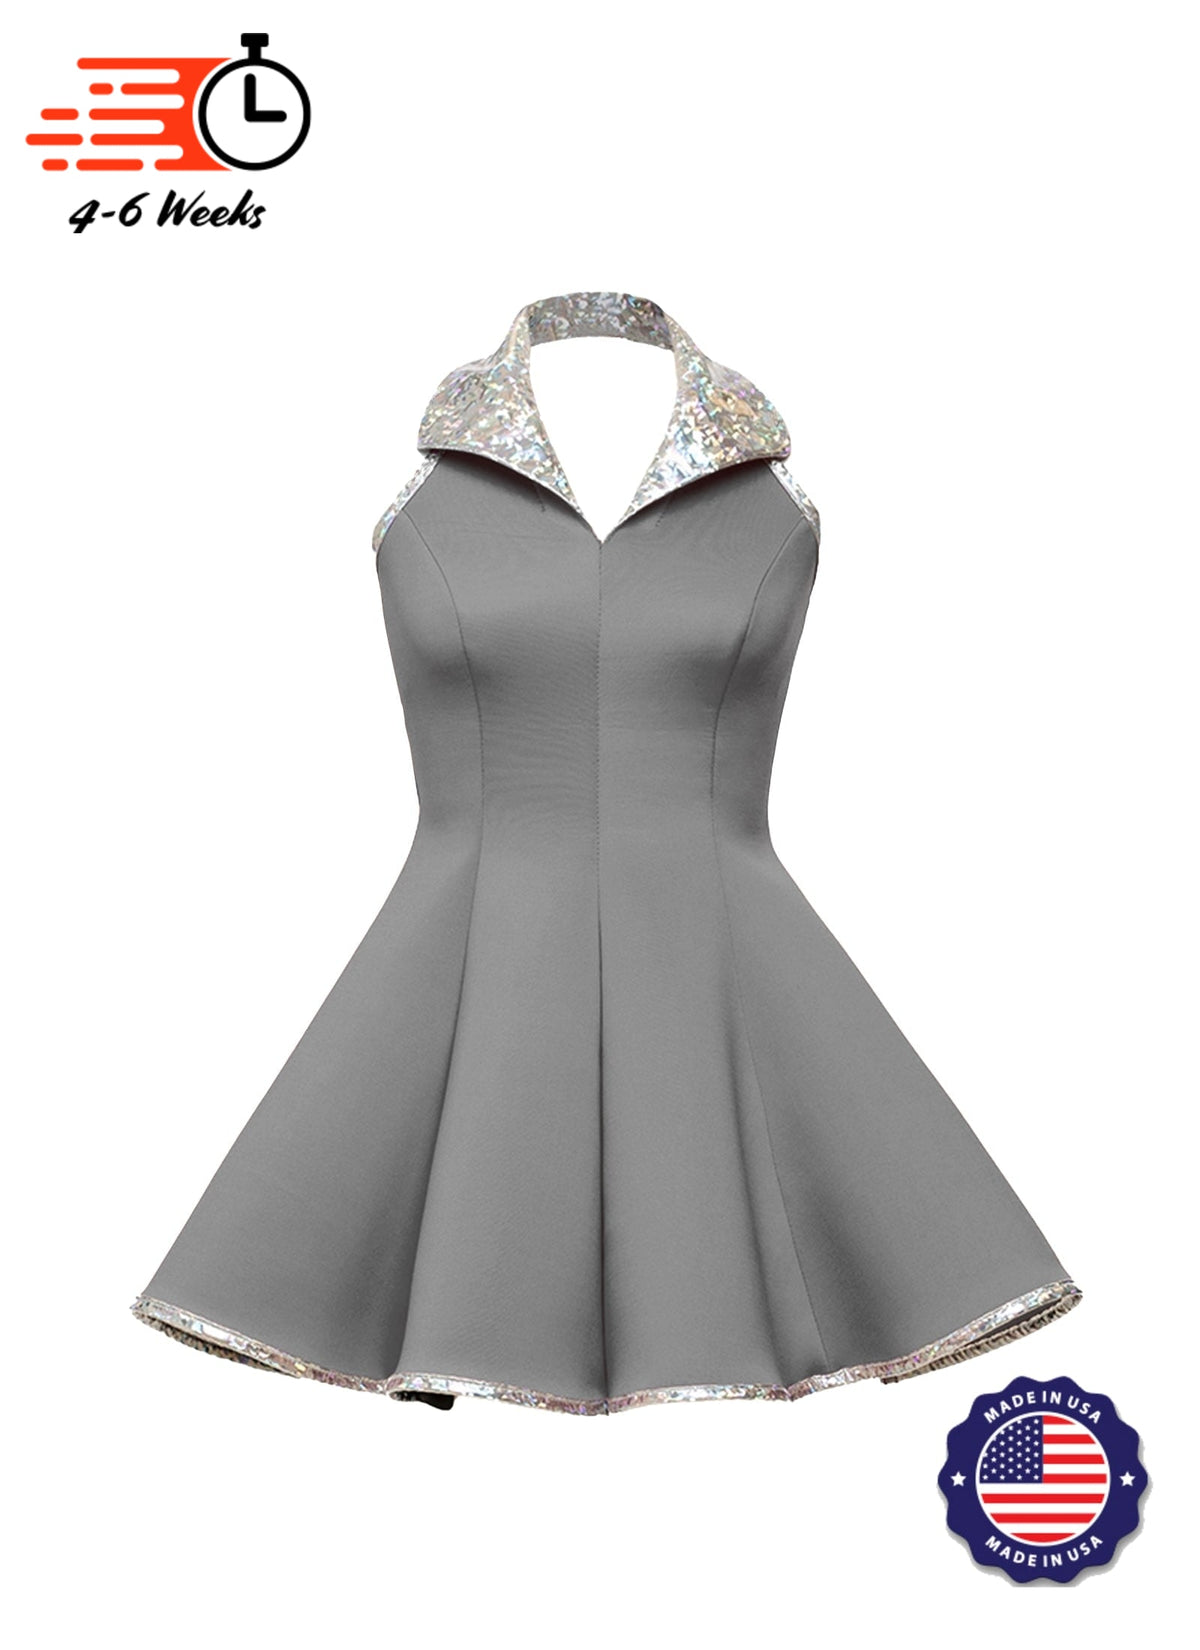 Lapel Collar Princess Panel Show Choir Dress - Neutrals and Black - Ships 4 to 6 weeks